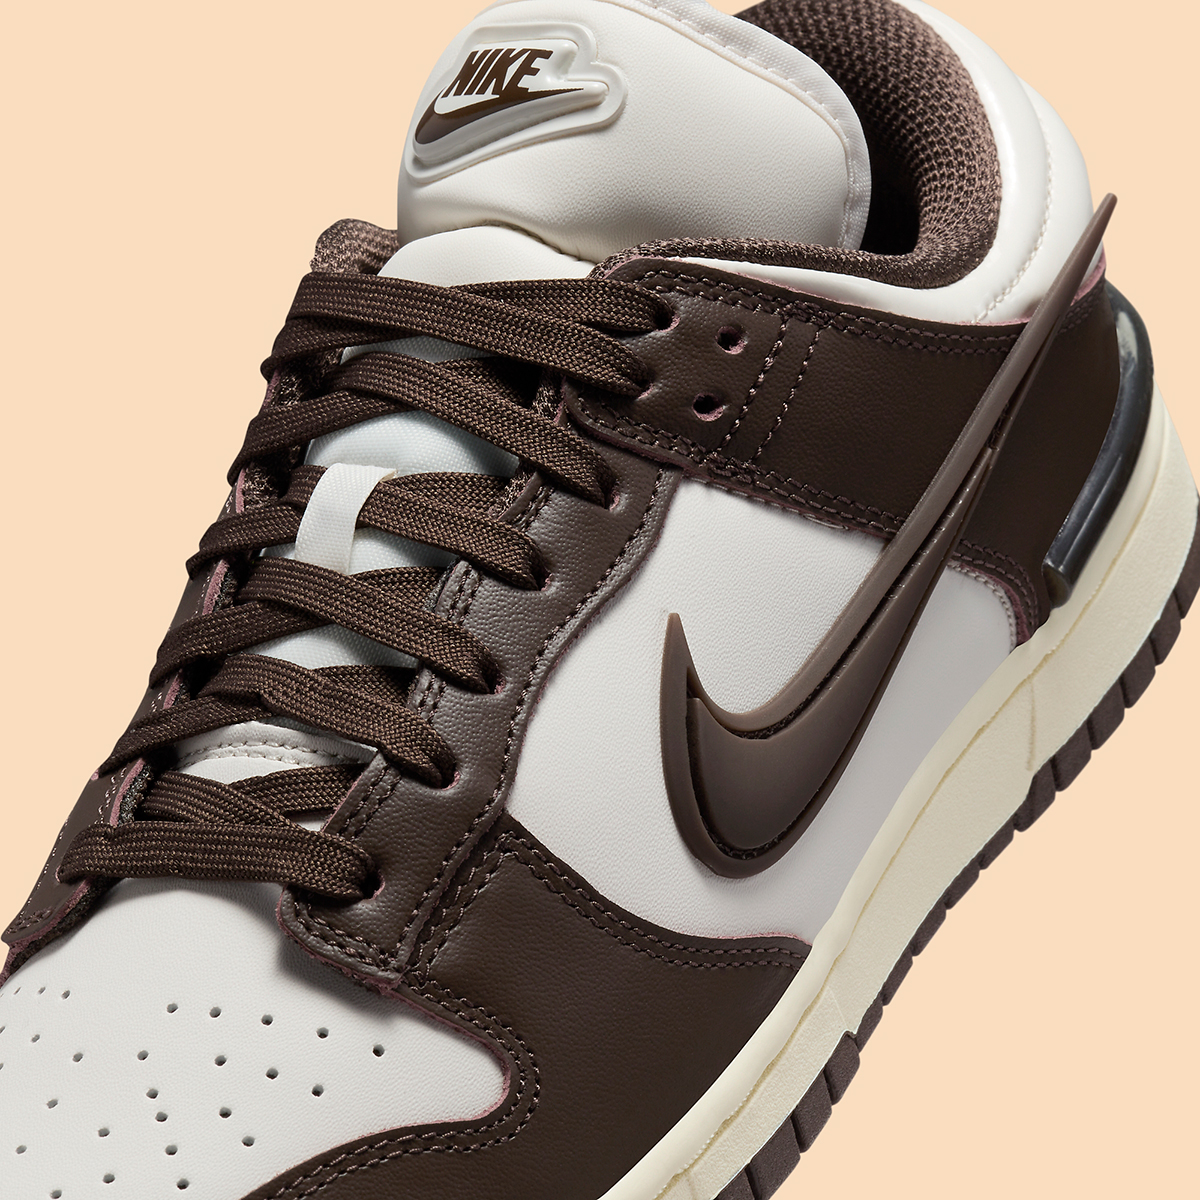 nike real flex shoes clearance outlet location Twist Phantom Baroque Brown Coconut Milk Dz2794 003 7